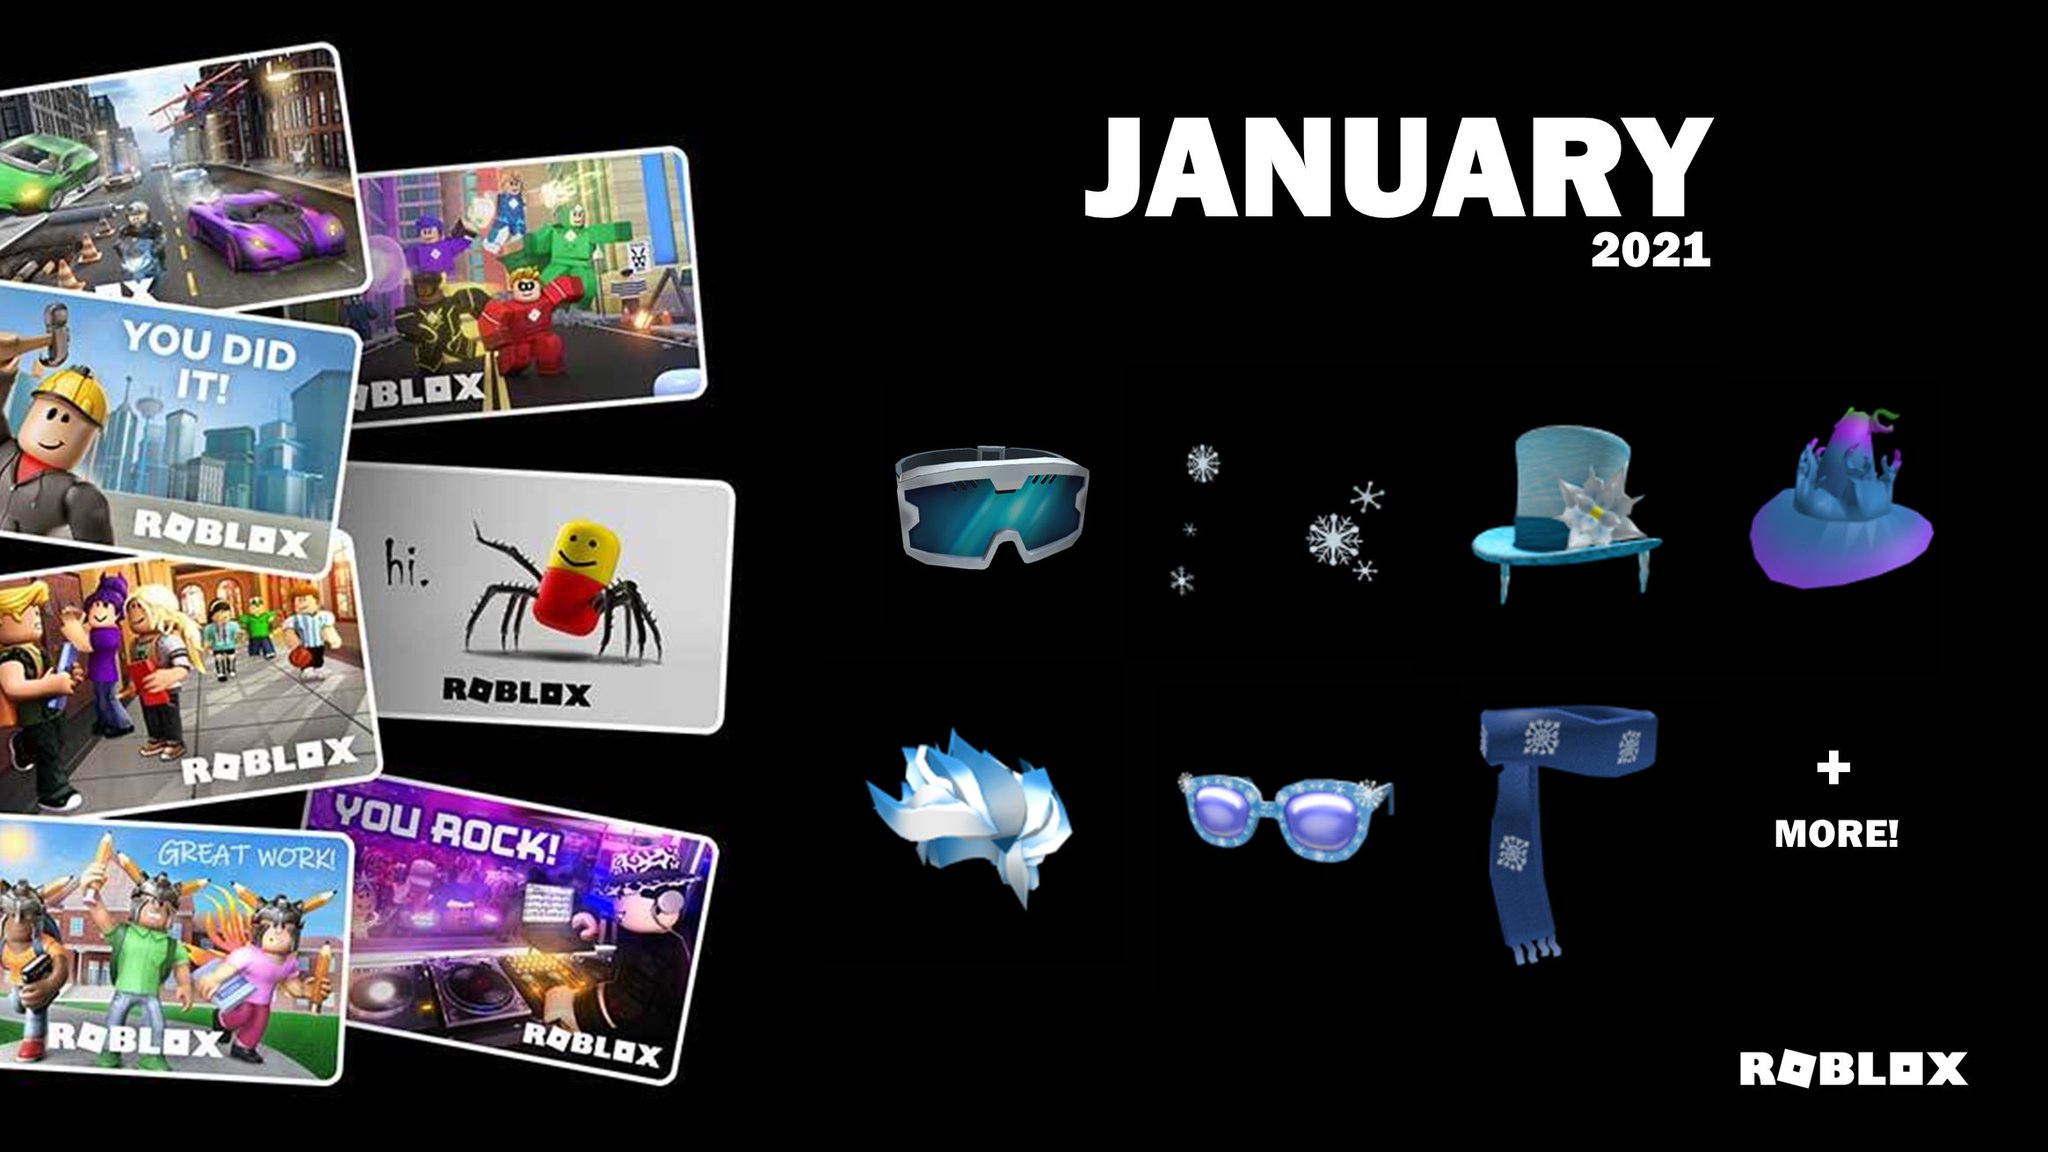 Bloxy News On Twitter The Roblox Gift Card Virtual Items And Their Corresponding Stores For January 2021 Are Now Available Check Them Out Here Https T Co Pujwqlz5yt Purchase A Gift Card - roblox gift cards back code